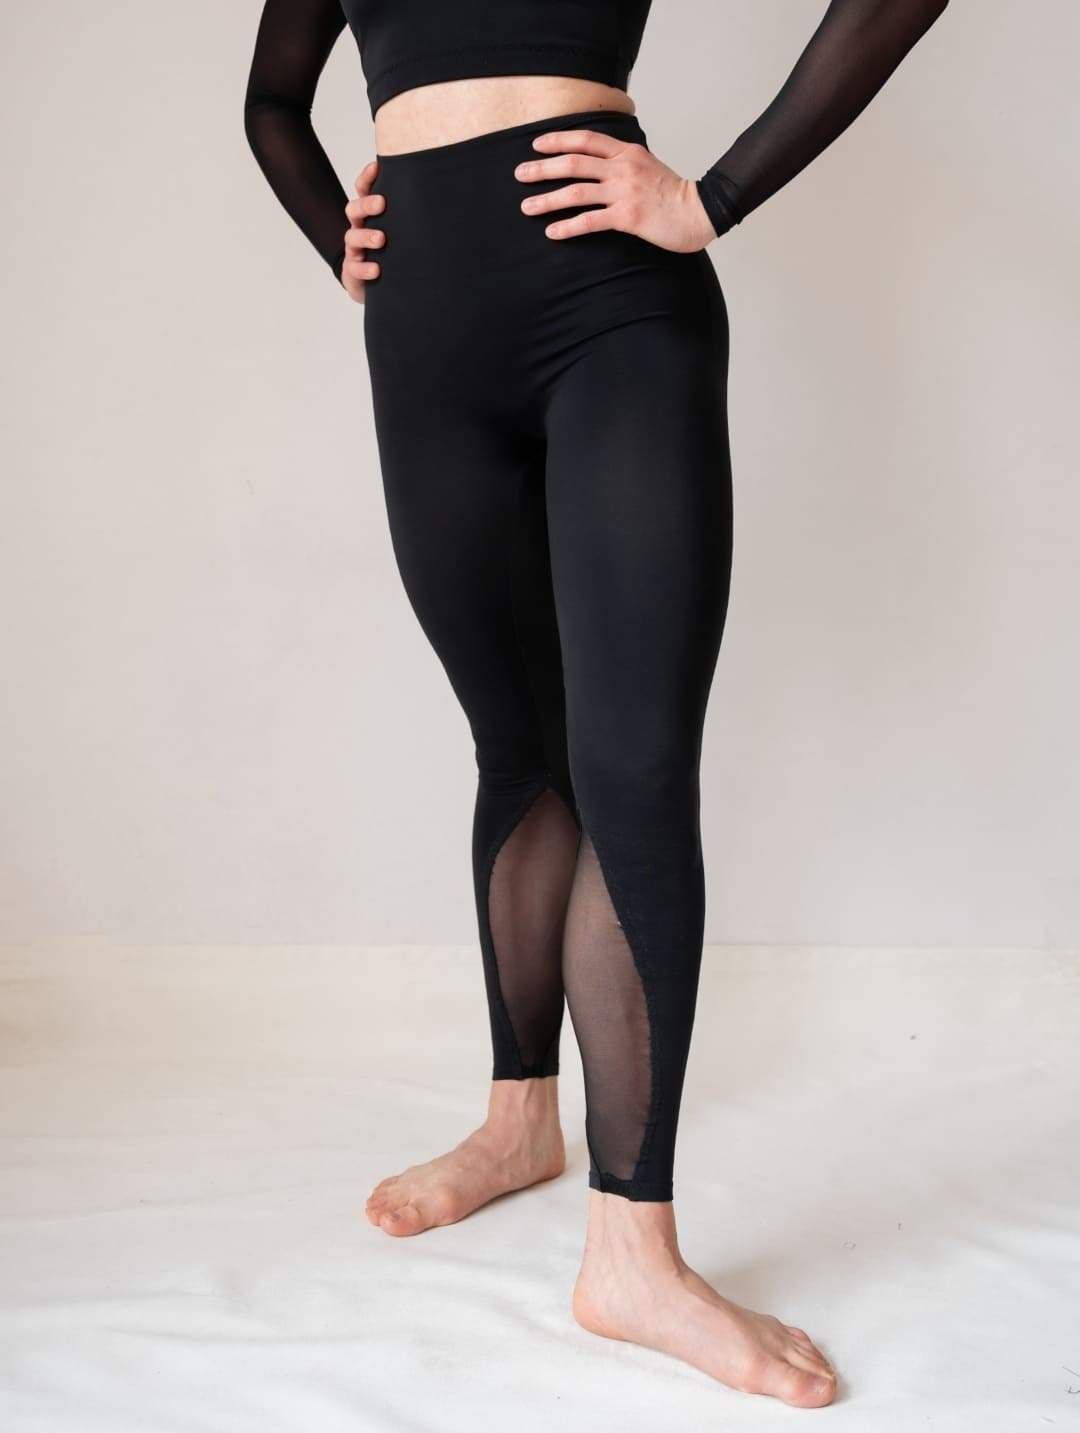 Electric Yoga Workout Clothes: Women's Activewear & Athletic Wear